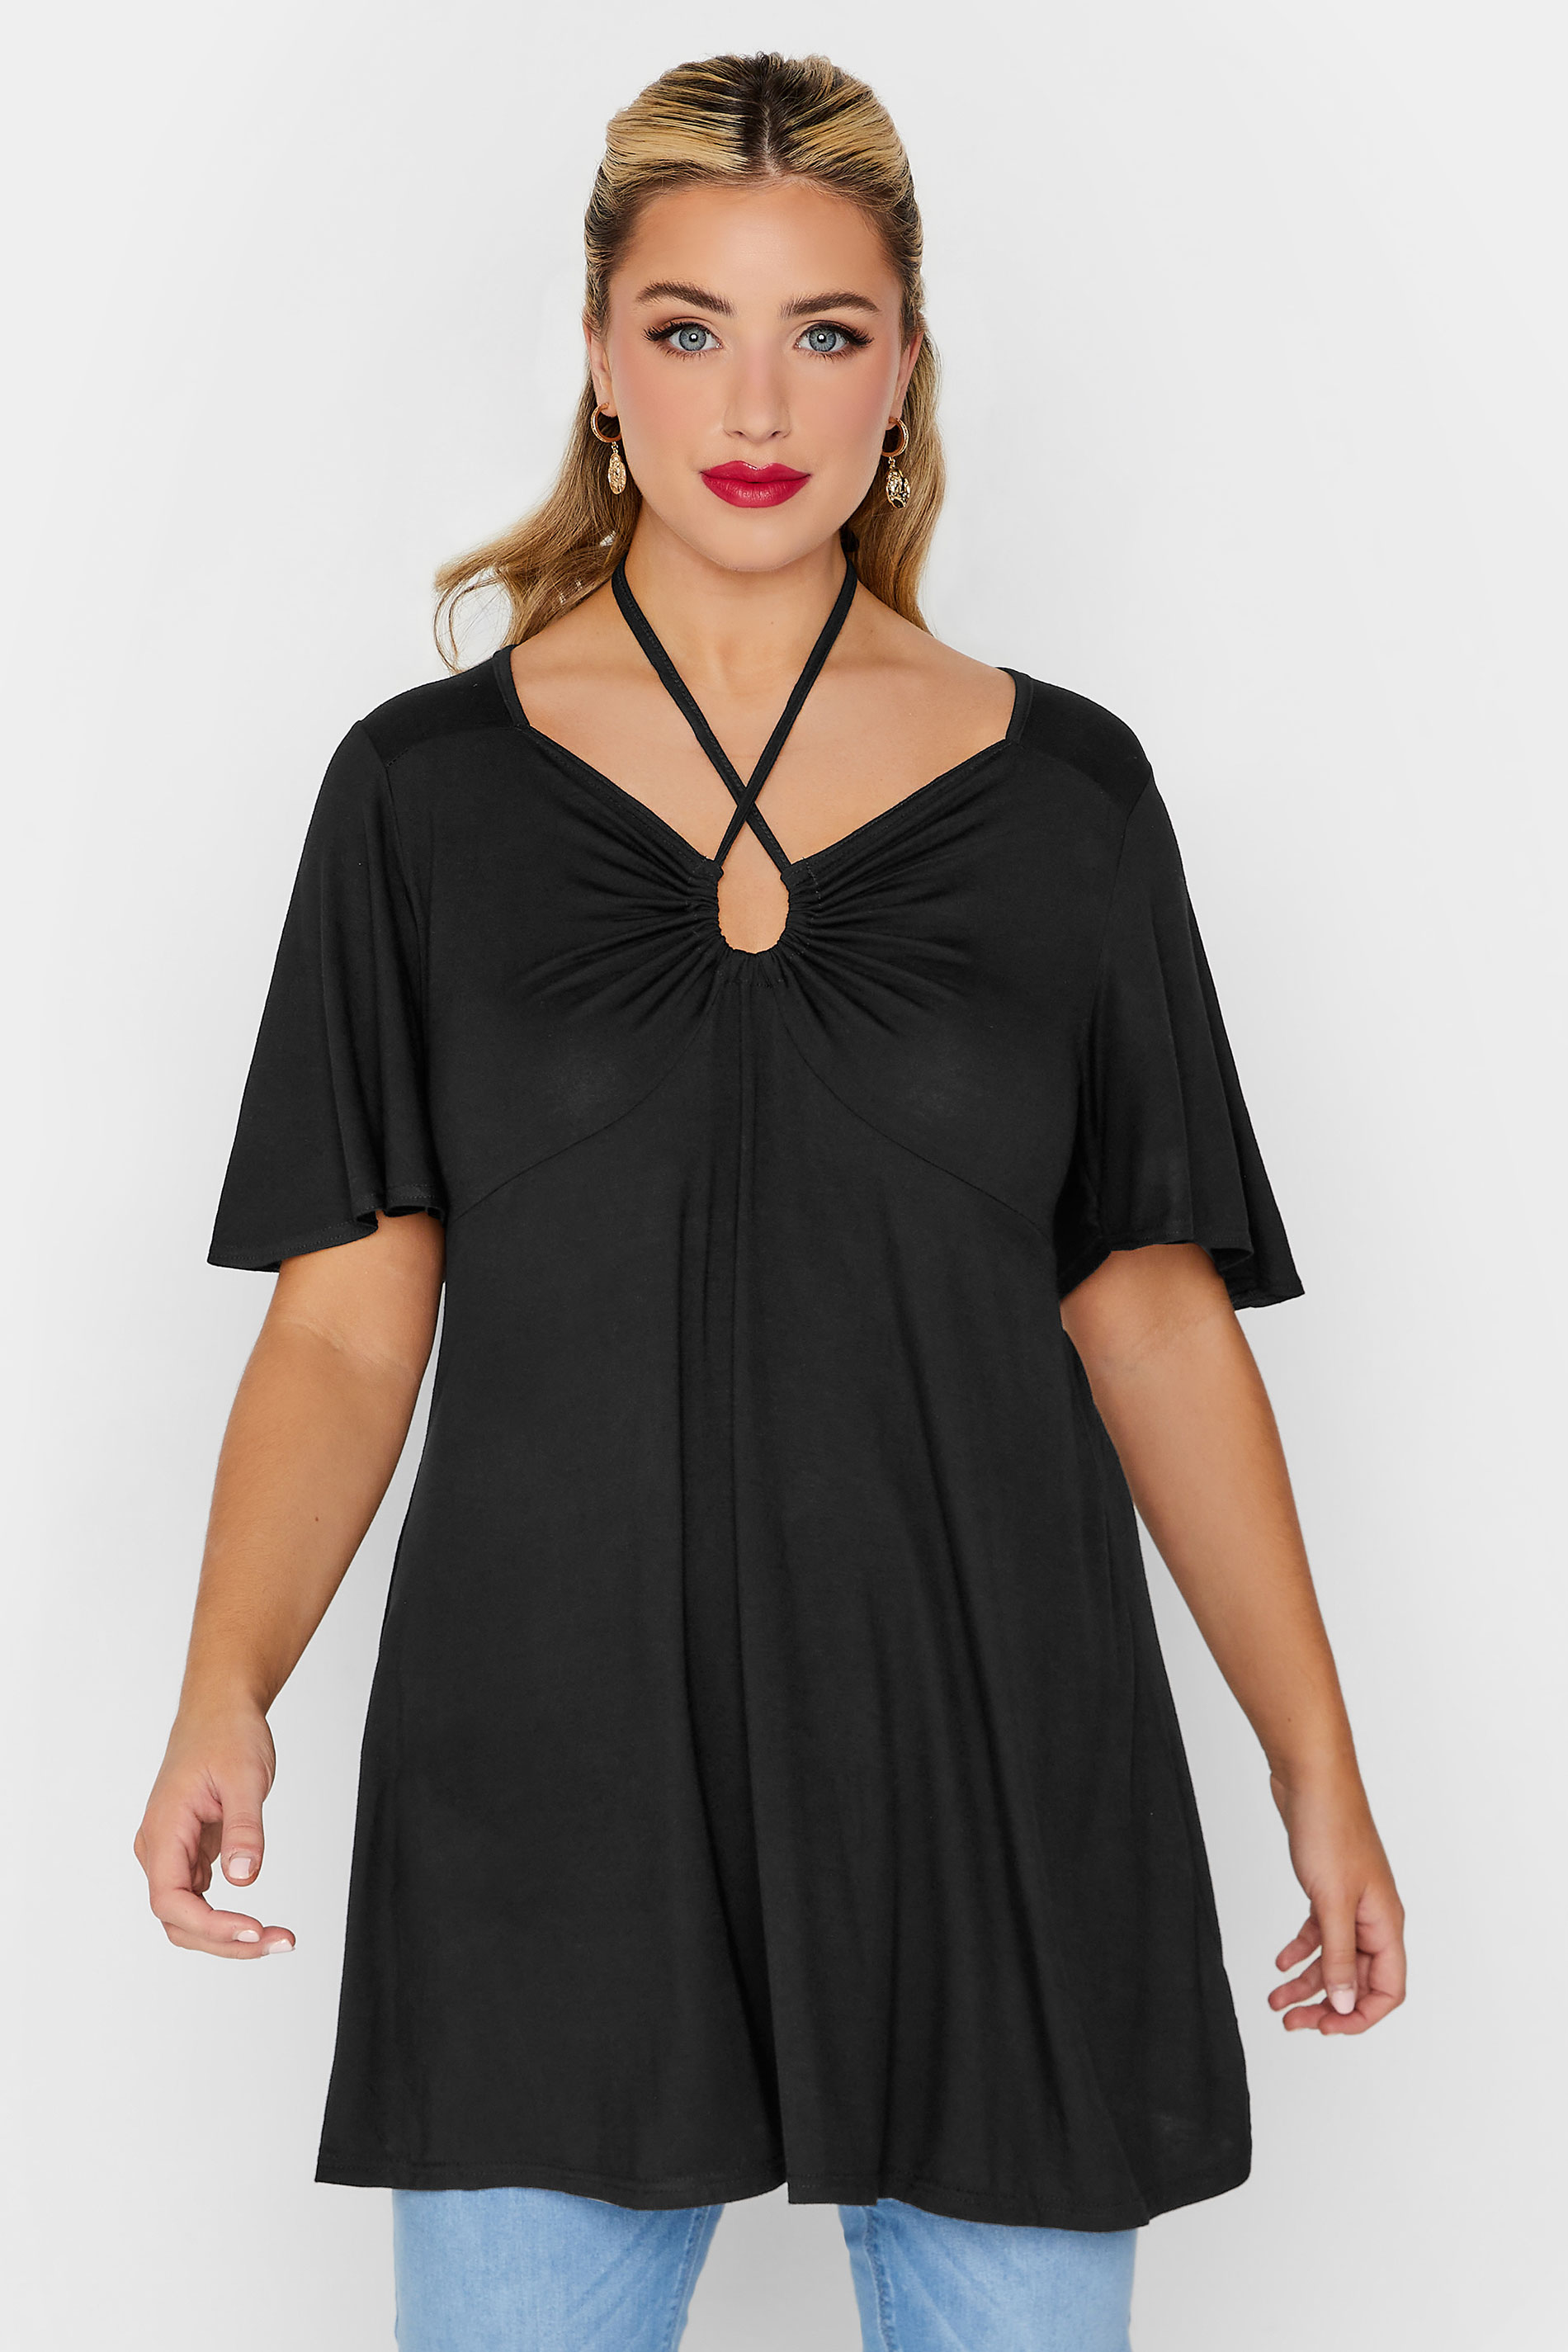 LIMITED COLLECTION Curve Plus Size Black Tie Neck Top | Yours Clothing  1